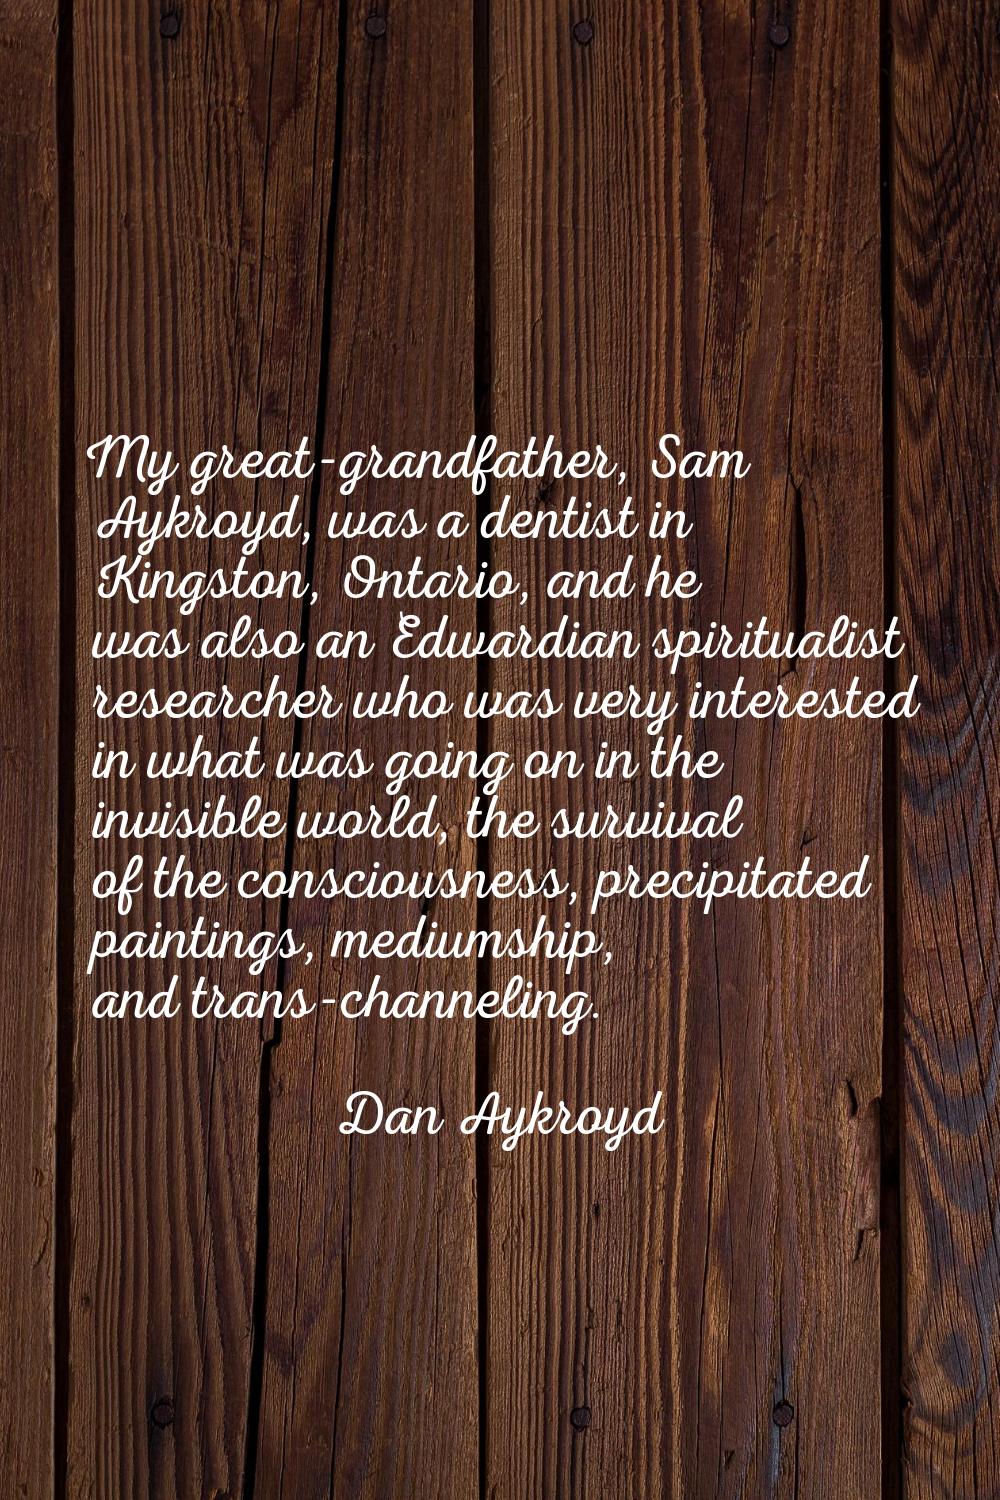 My great-grandfather, Sam Aykroyd, was a dentist in Kingston, Ontario, and he was also an Edwardian